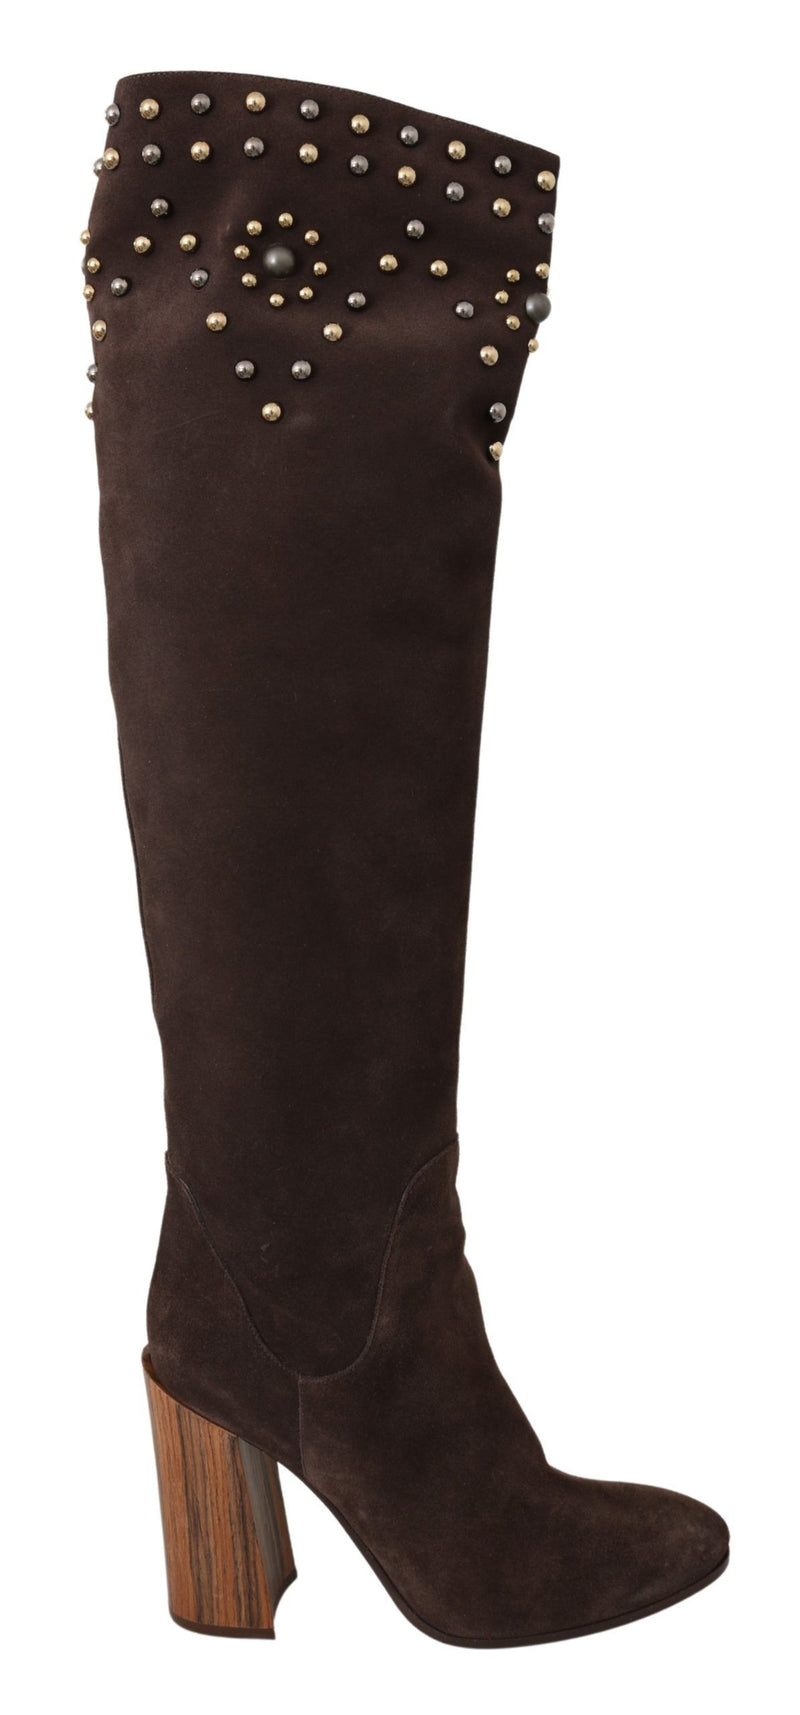 Dolce & Gabbana Brown Suede Studded Knee High Shoes Women's Boots